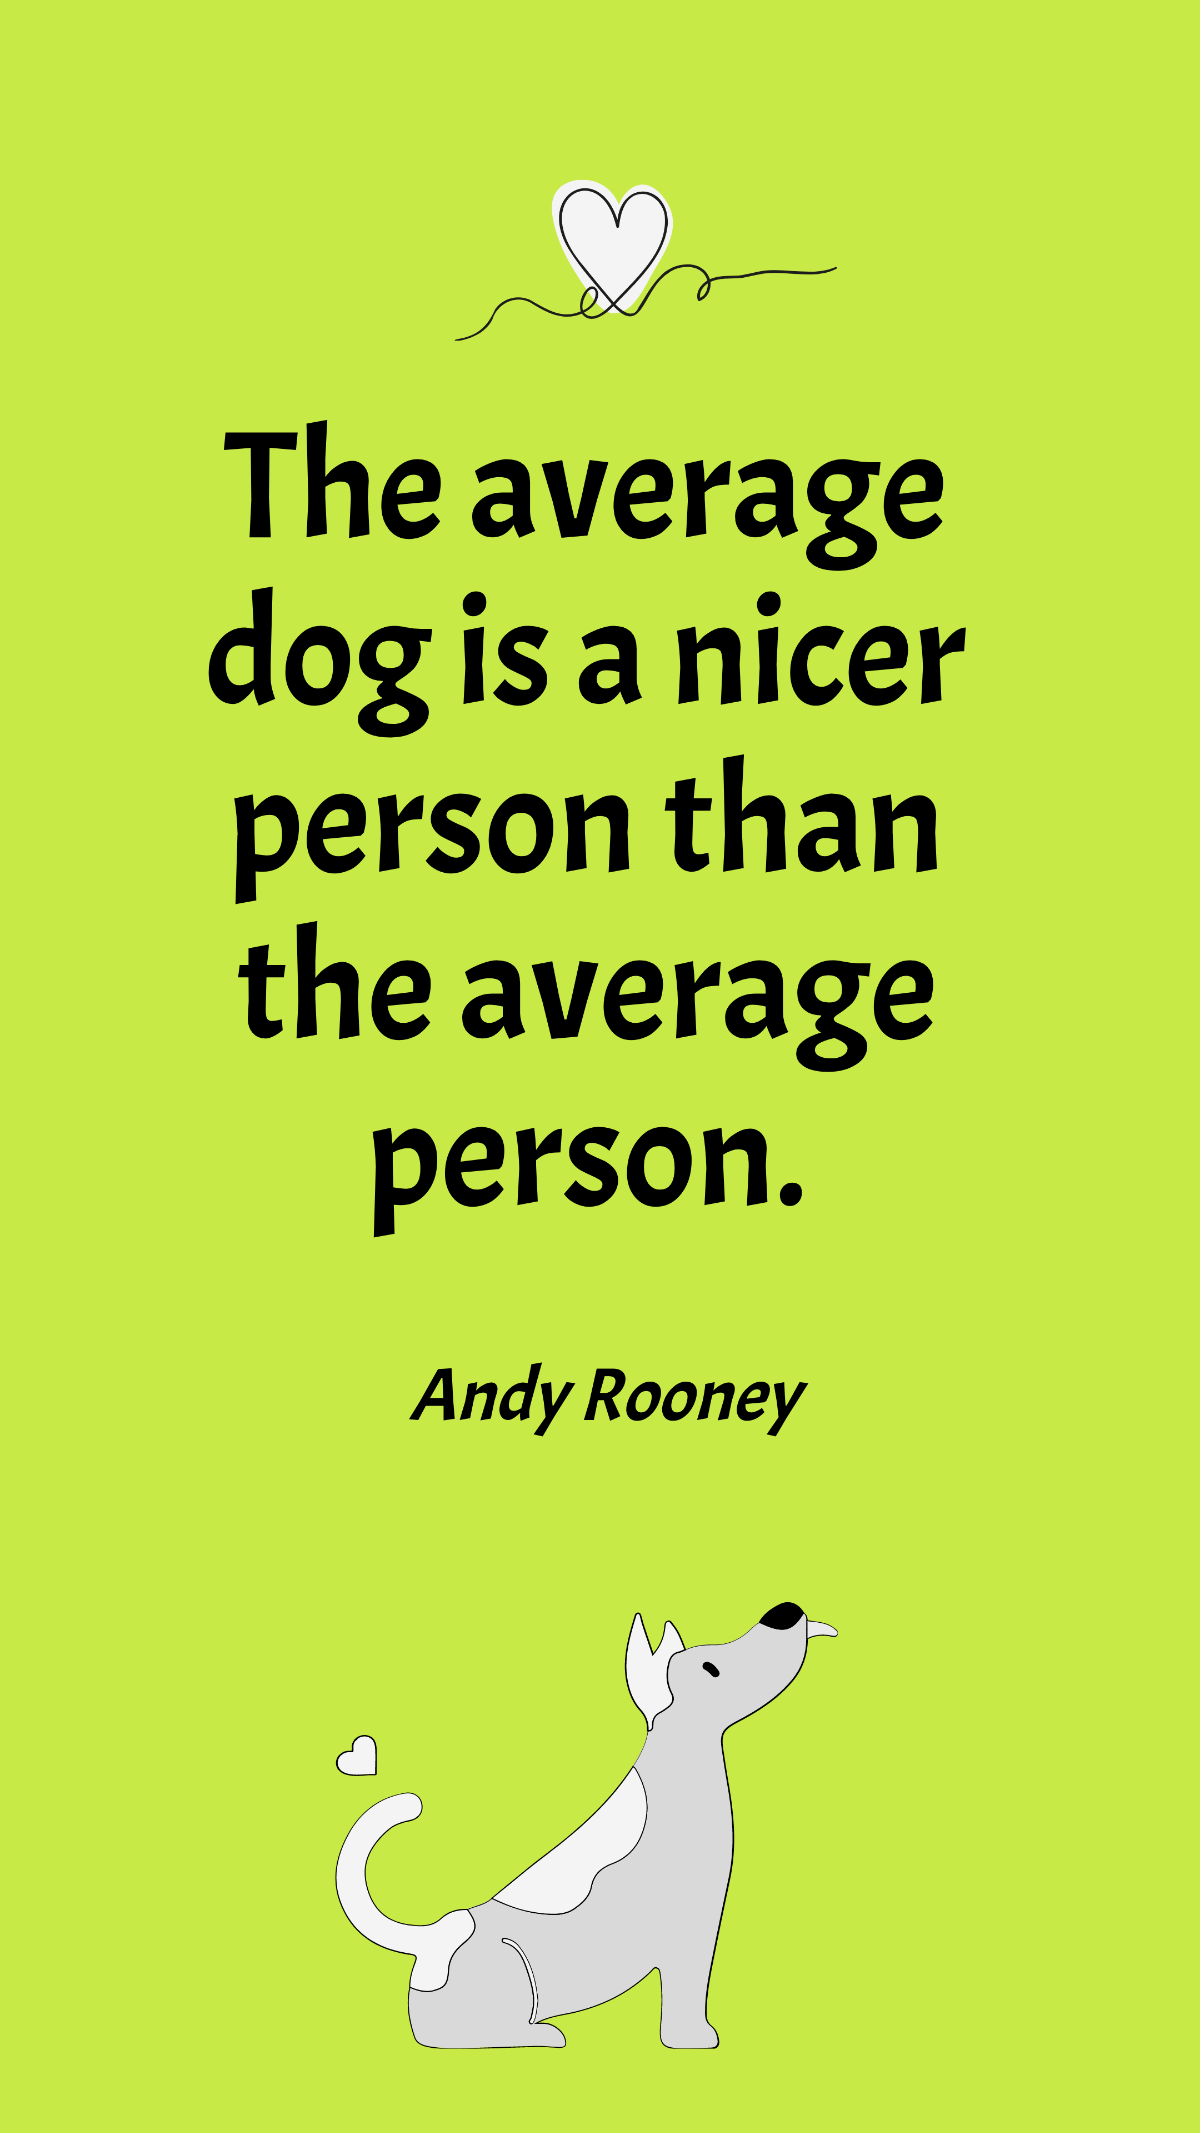 Free Andy Rooney - The average dog is a nicer person than the average person. Template